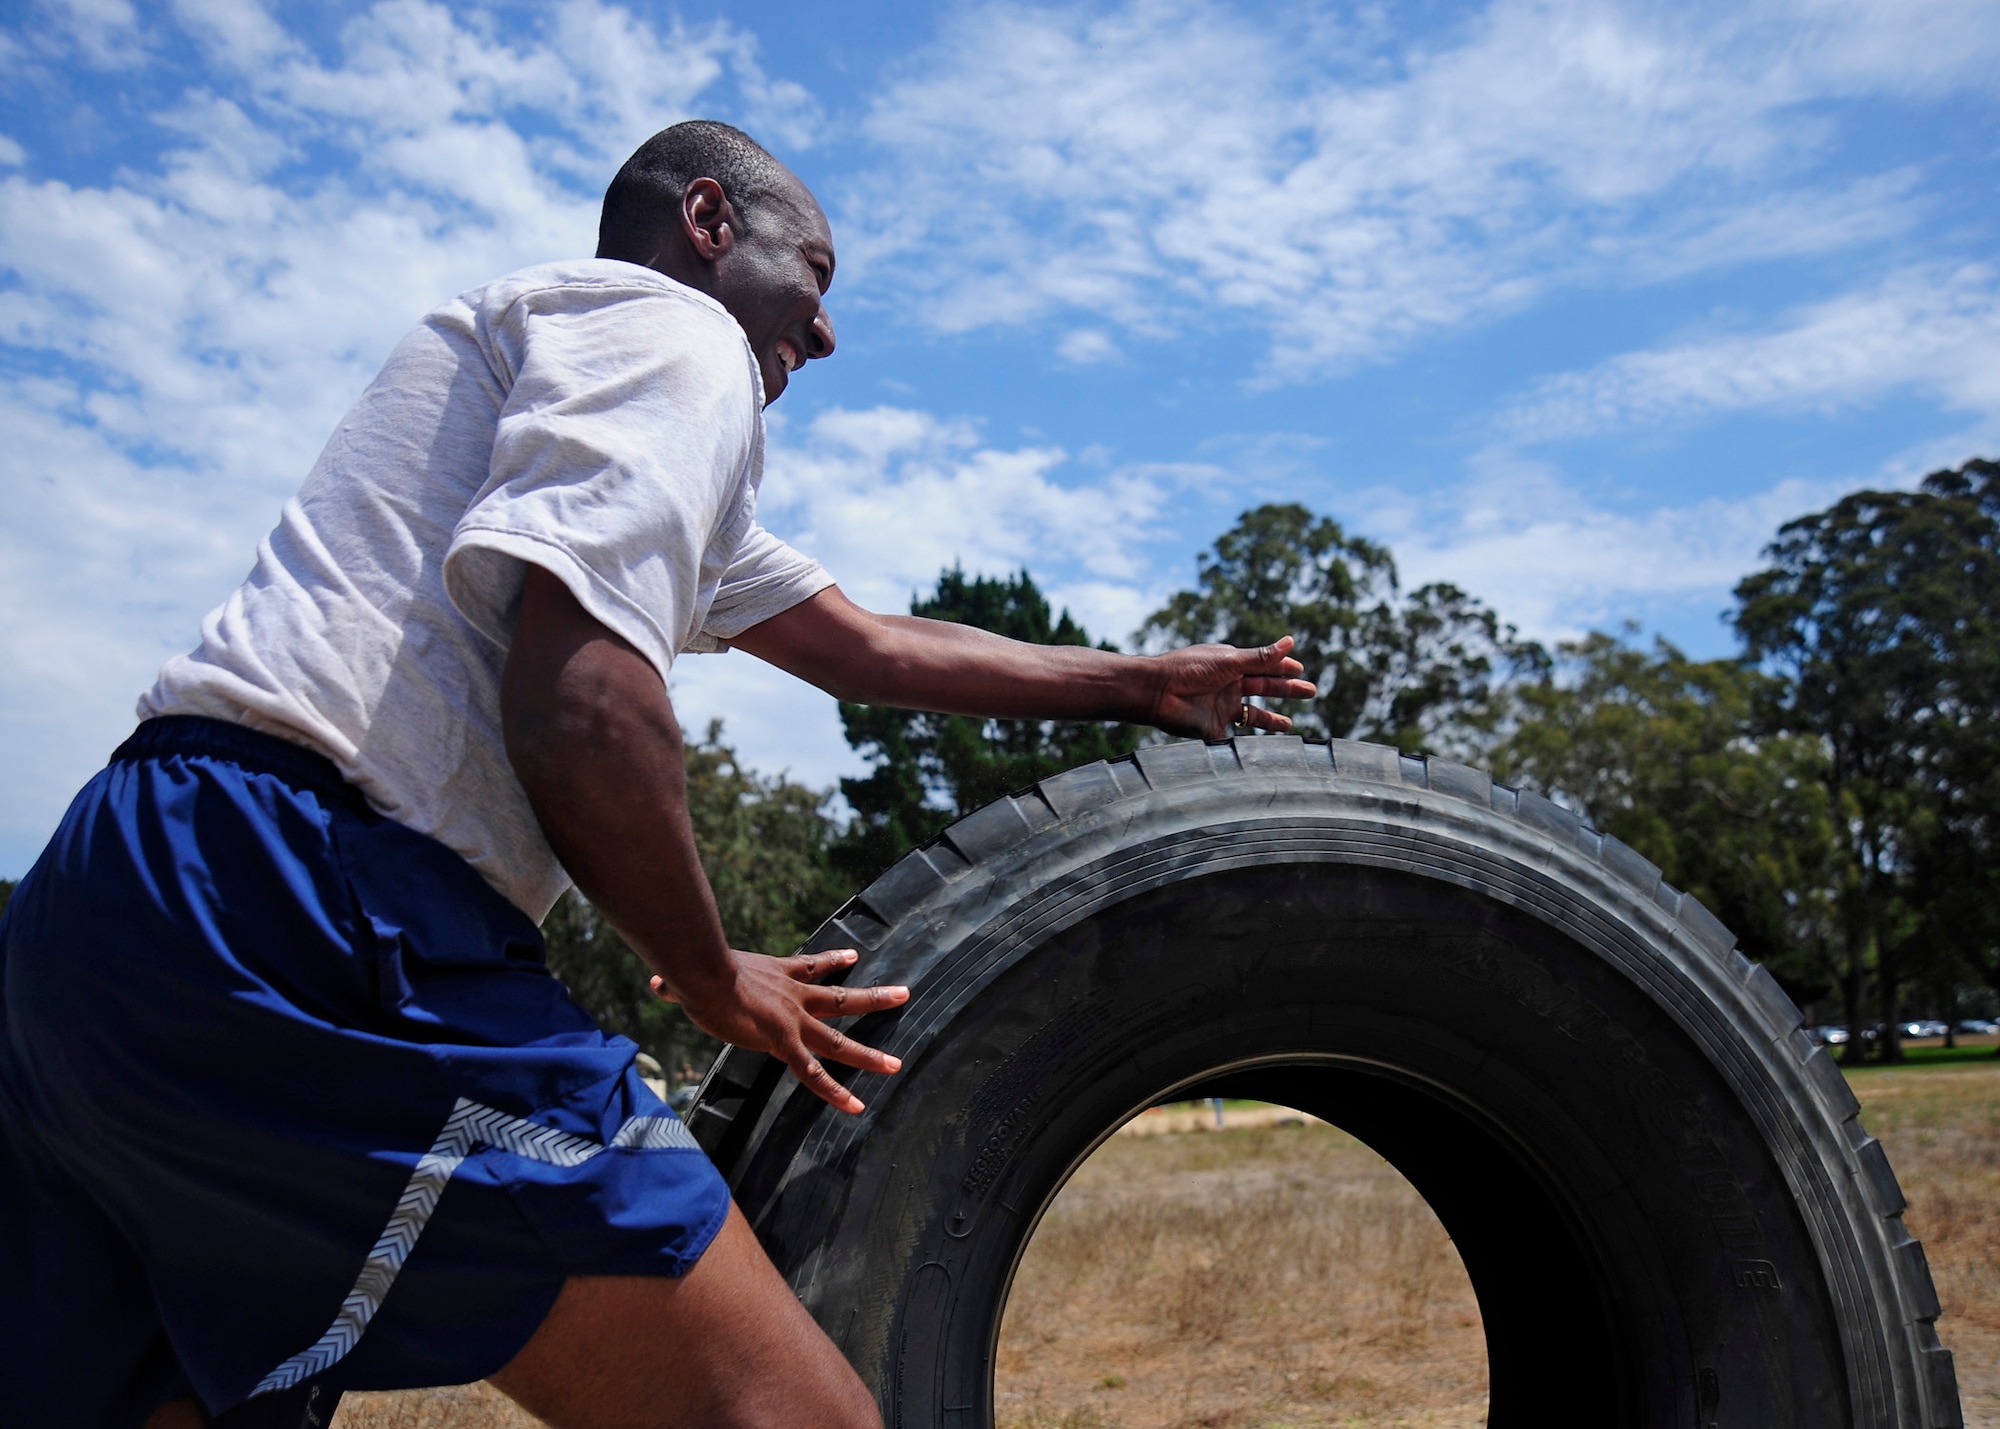 VANDENBERG AIR FORCE BASE, Calif. -- Lt. Col. Warren Watties, 30th Space Wing chaplain, competes in the tire push portion of a Chiefs vs. Eagles relay race challenge during sports day at Cocheo Park here Friday, August 17, 2012. Sports day is organized by the 30th Force Support Squadron Fitness Center staff and offers squadrons and organizational teams a chance to compete in a variety of sporting events throughout the day. The 30th Civil Engineer Squadron finished the competition with the first place championship. (U.S. Air Force photo/Michael Peterson)